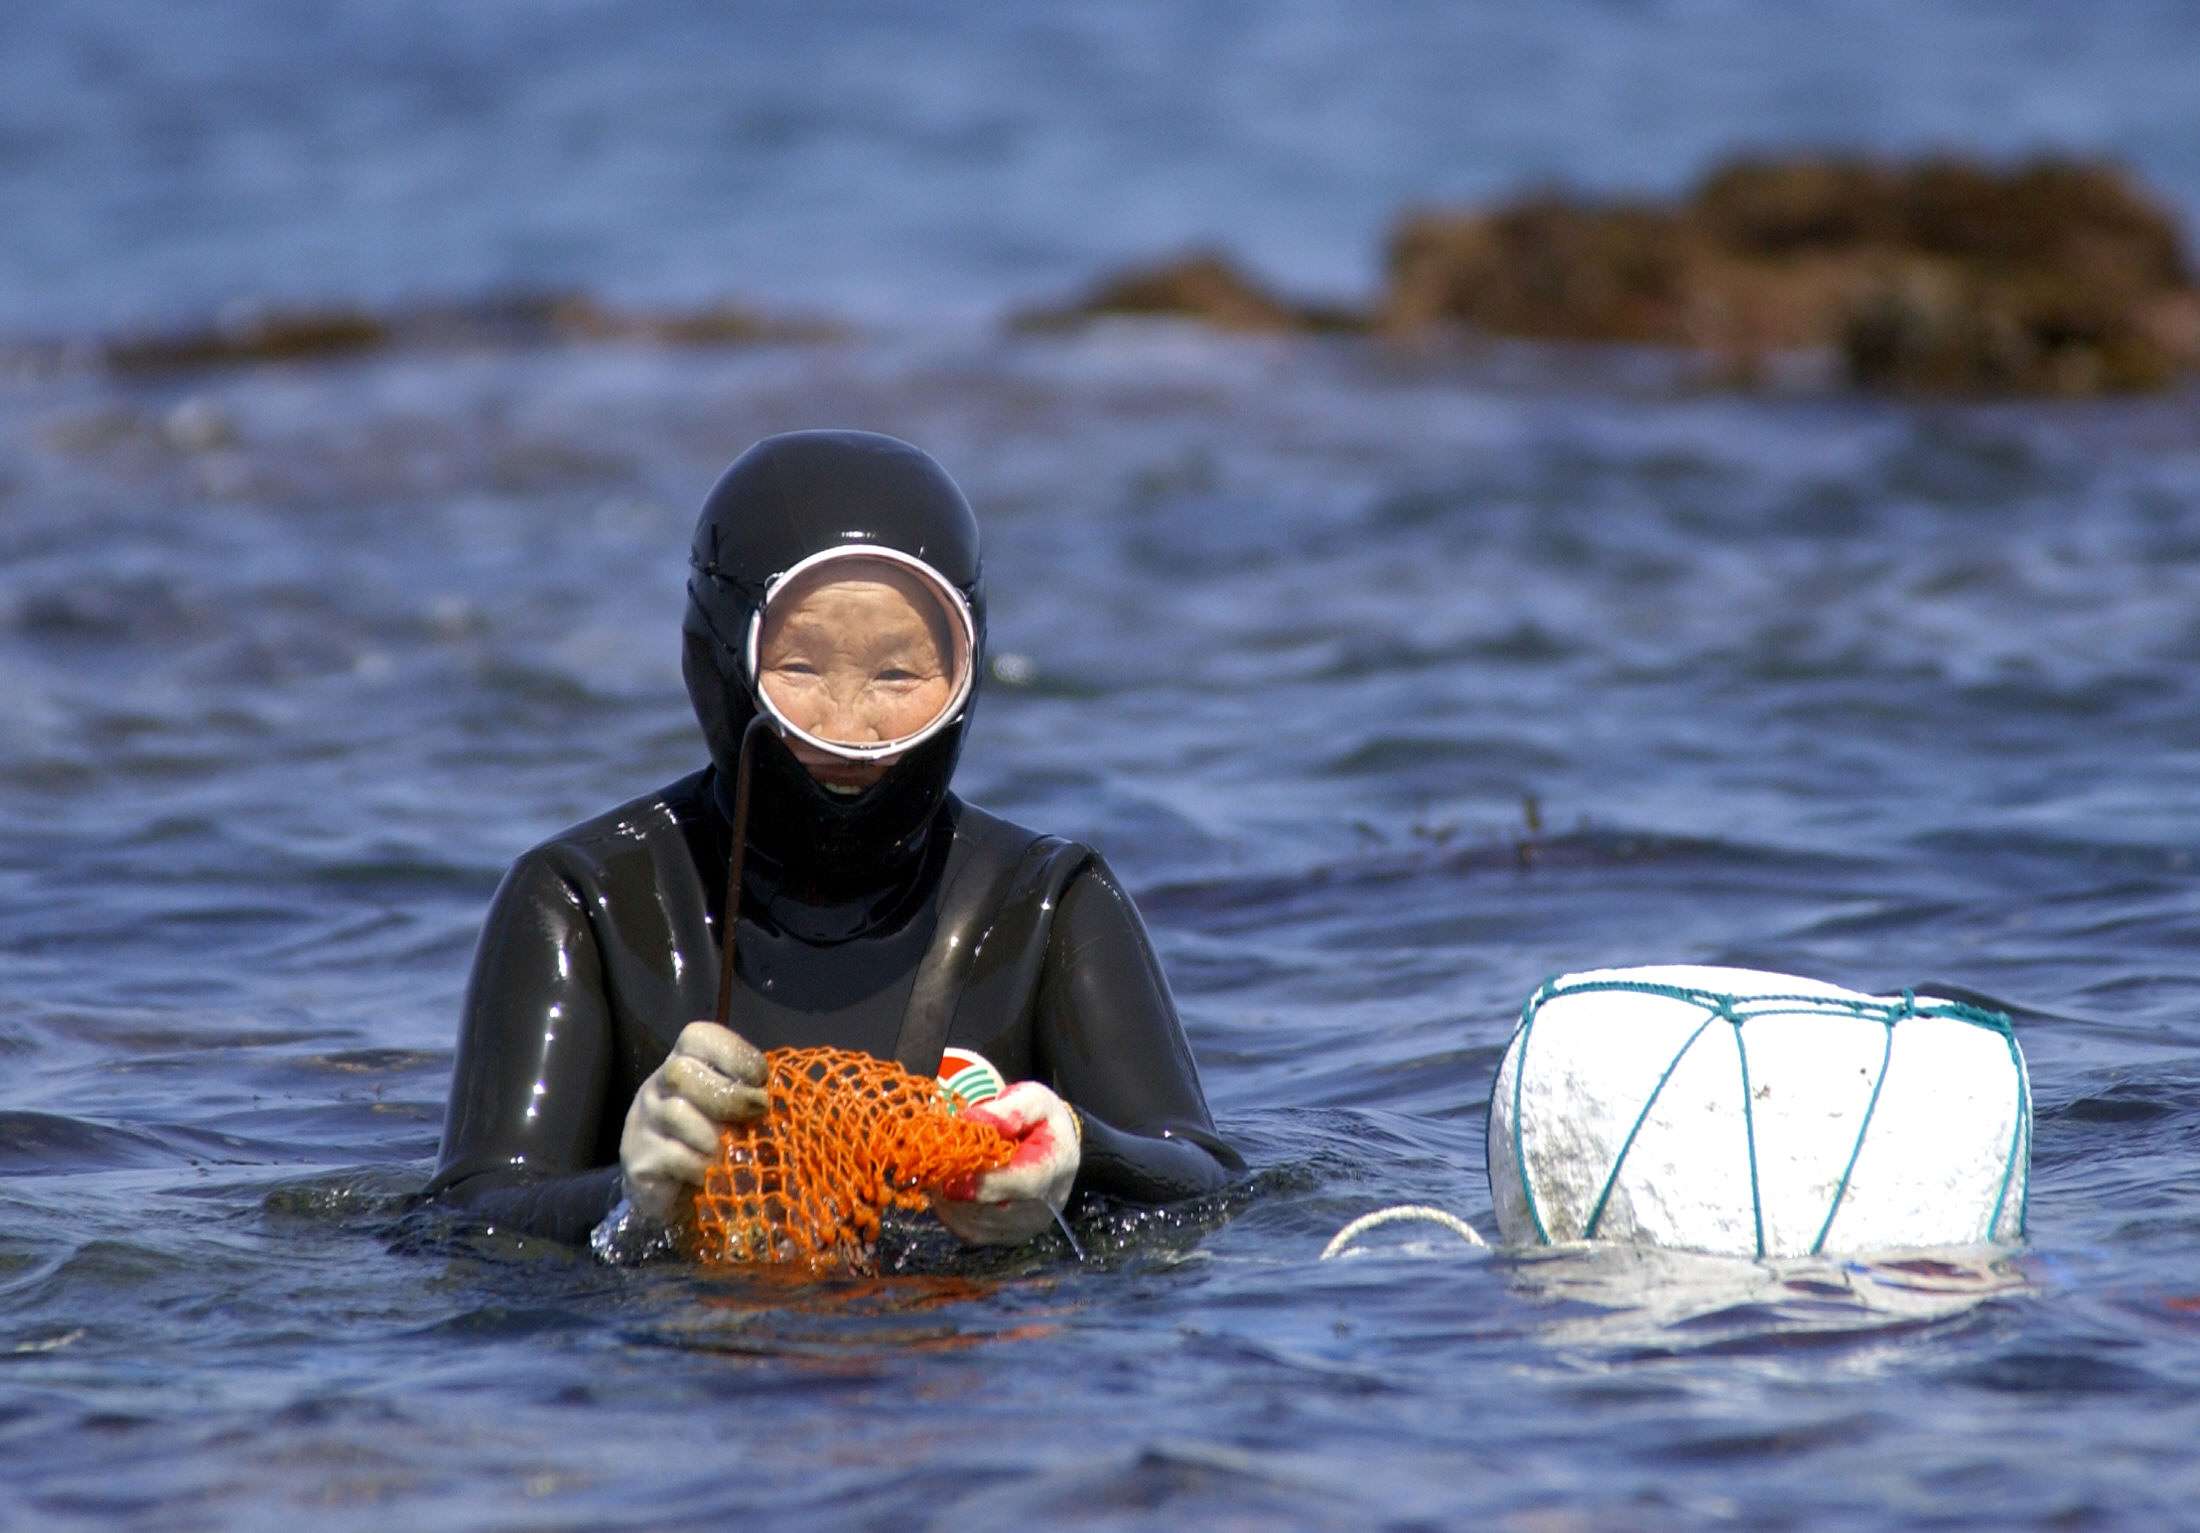 Jeju Island’s legendary female free divers, who comb the sea bottom to collect food, fuelled Anne Hilty’s fictional account in the “A Sense of Place” section of Imprint 16. Photo: AFP